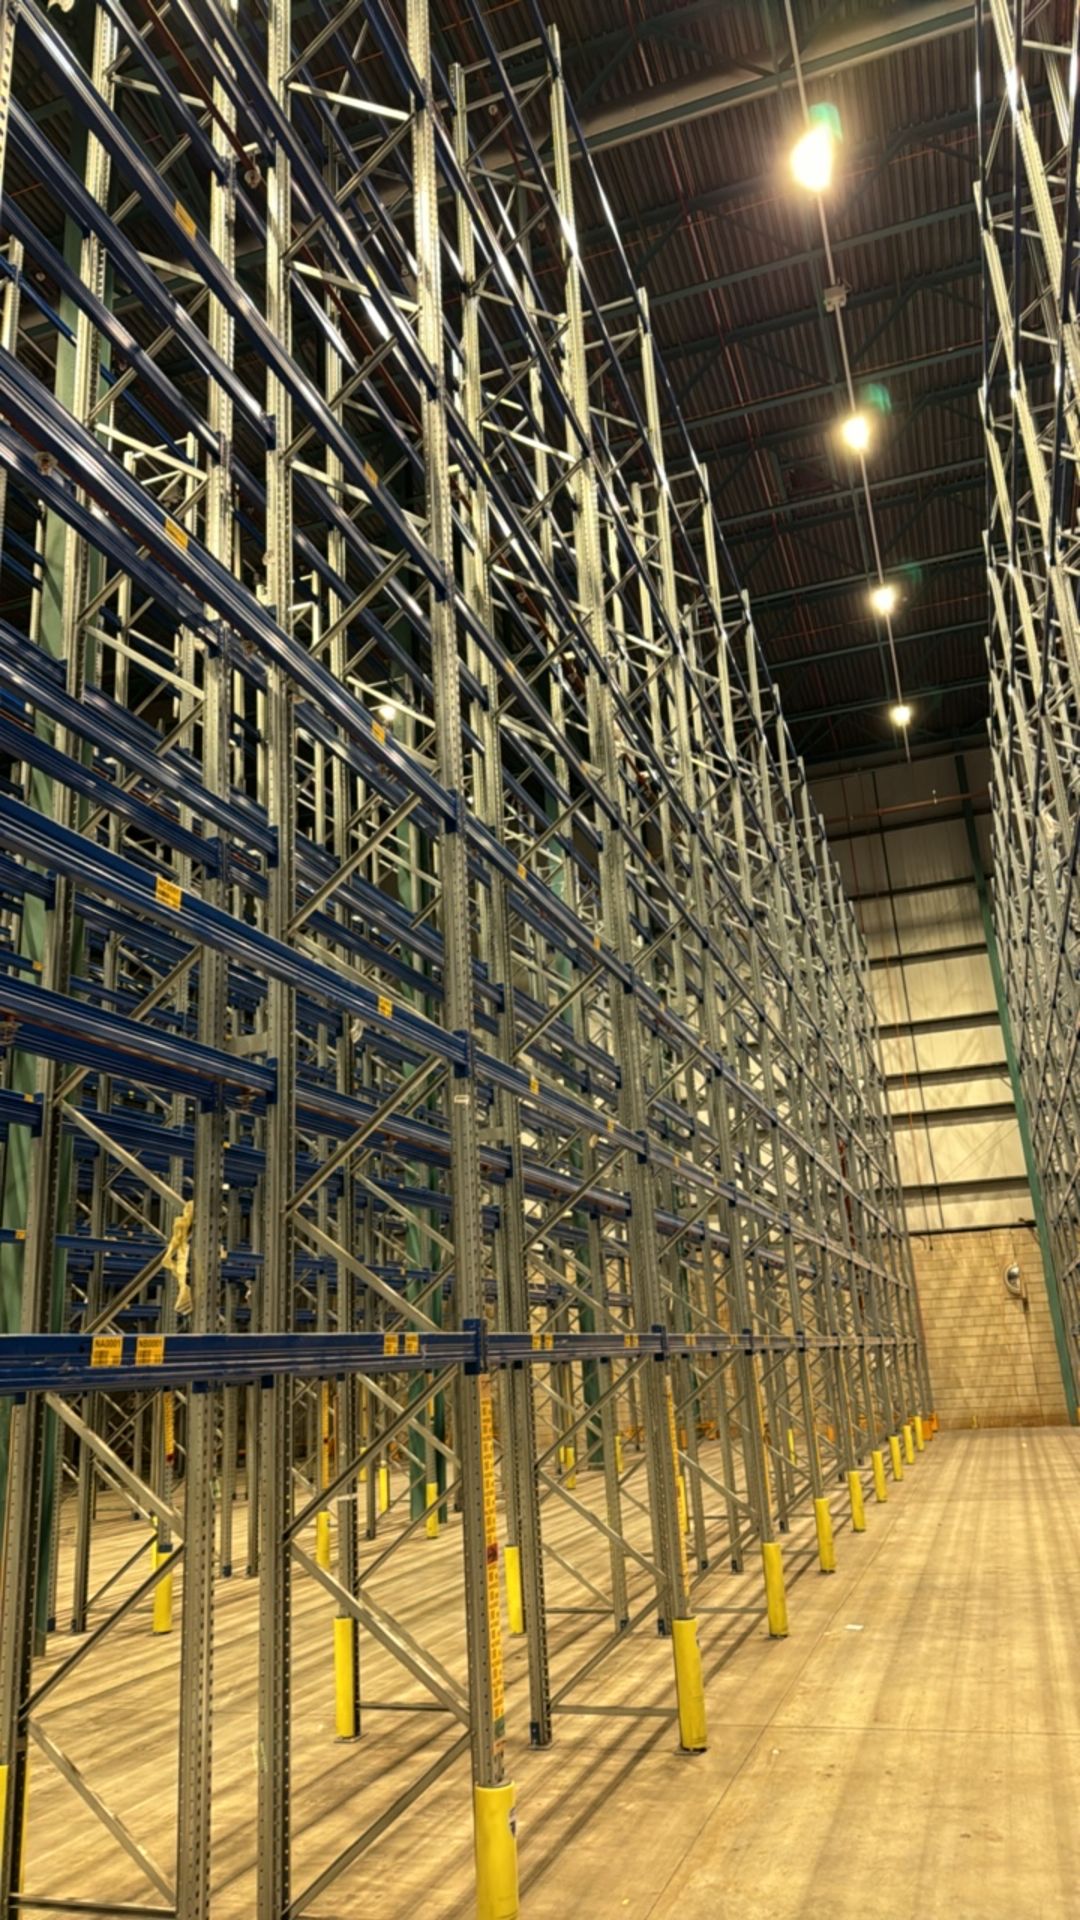 Run Of 32 Bays Of Back To Back Boltless Pallet Racking - Image 8 of 10